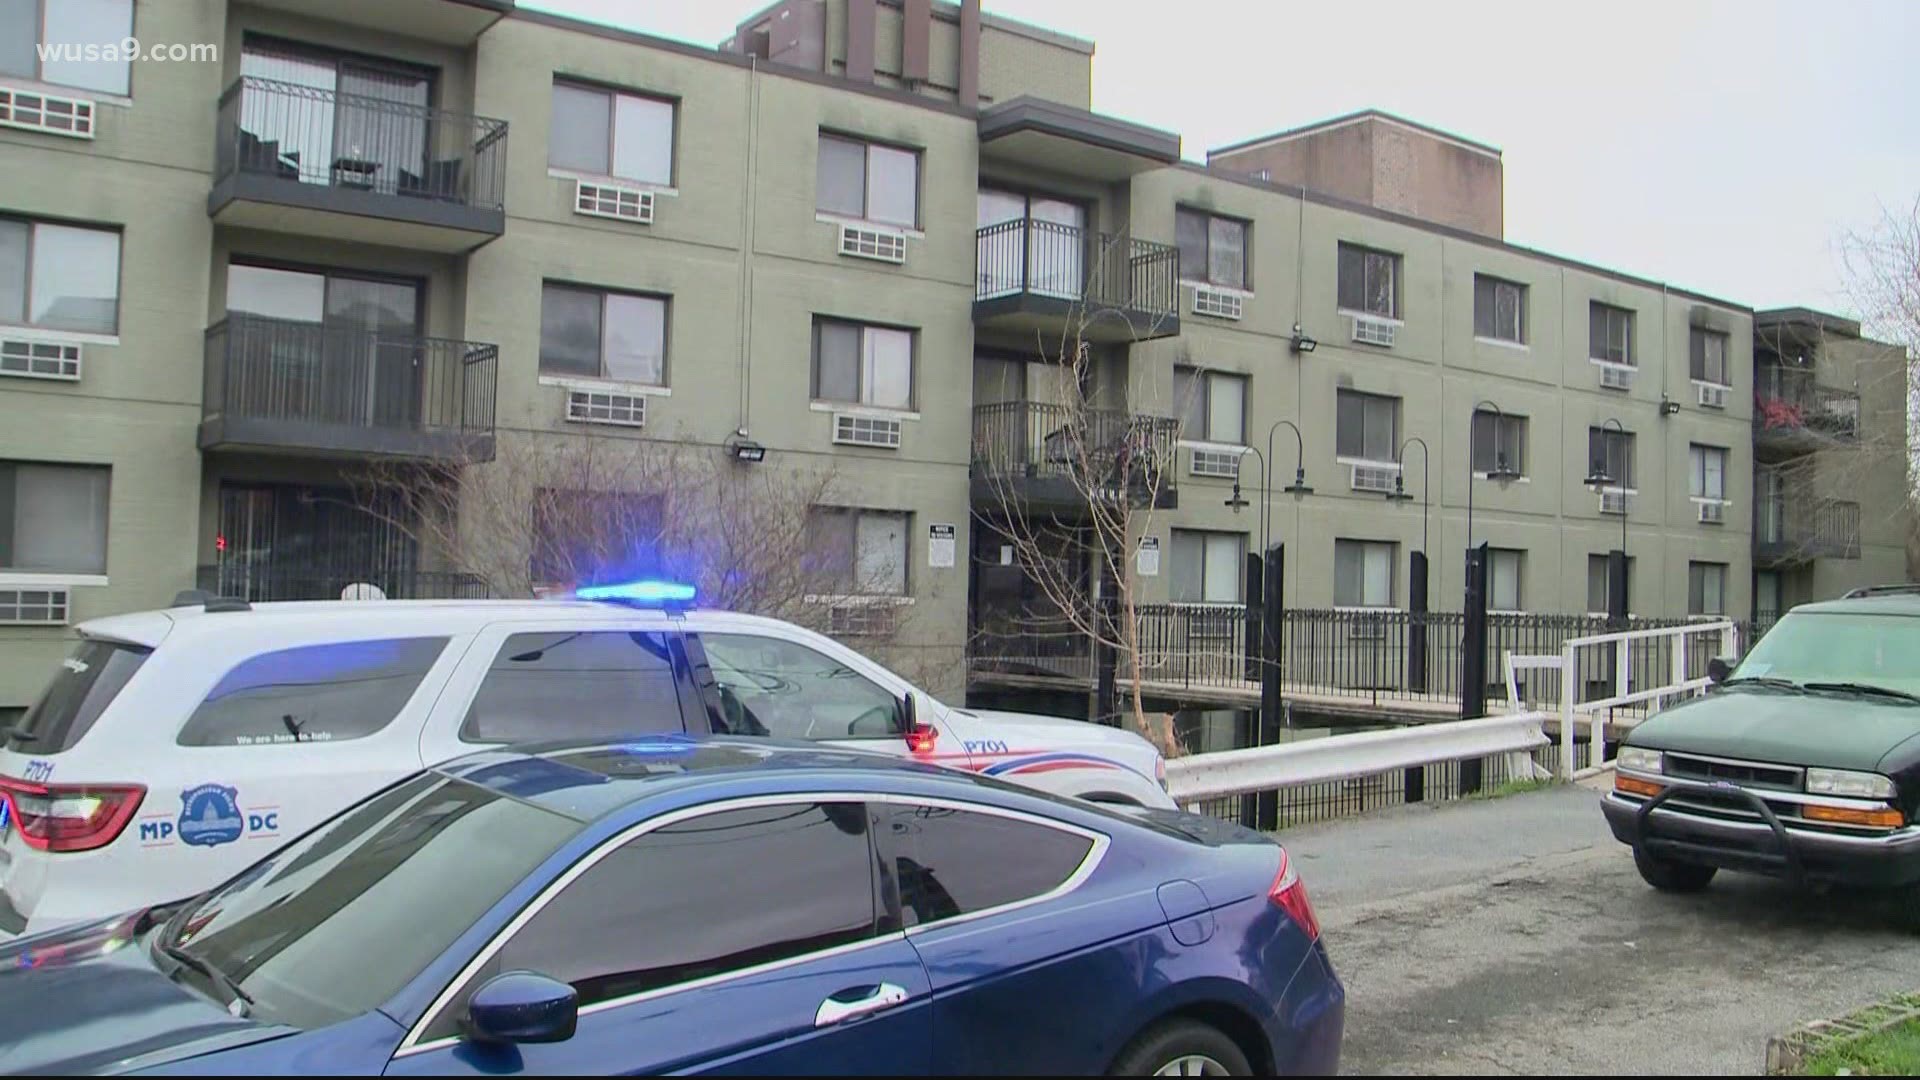 When police arrived on scene at an apartment complex, D.C. Police found two victims suffering from gunshot wounds.